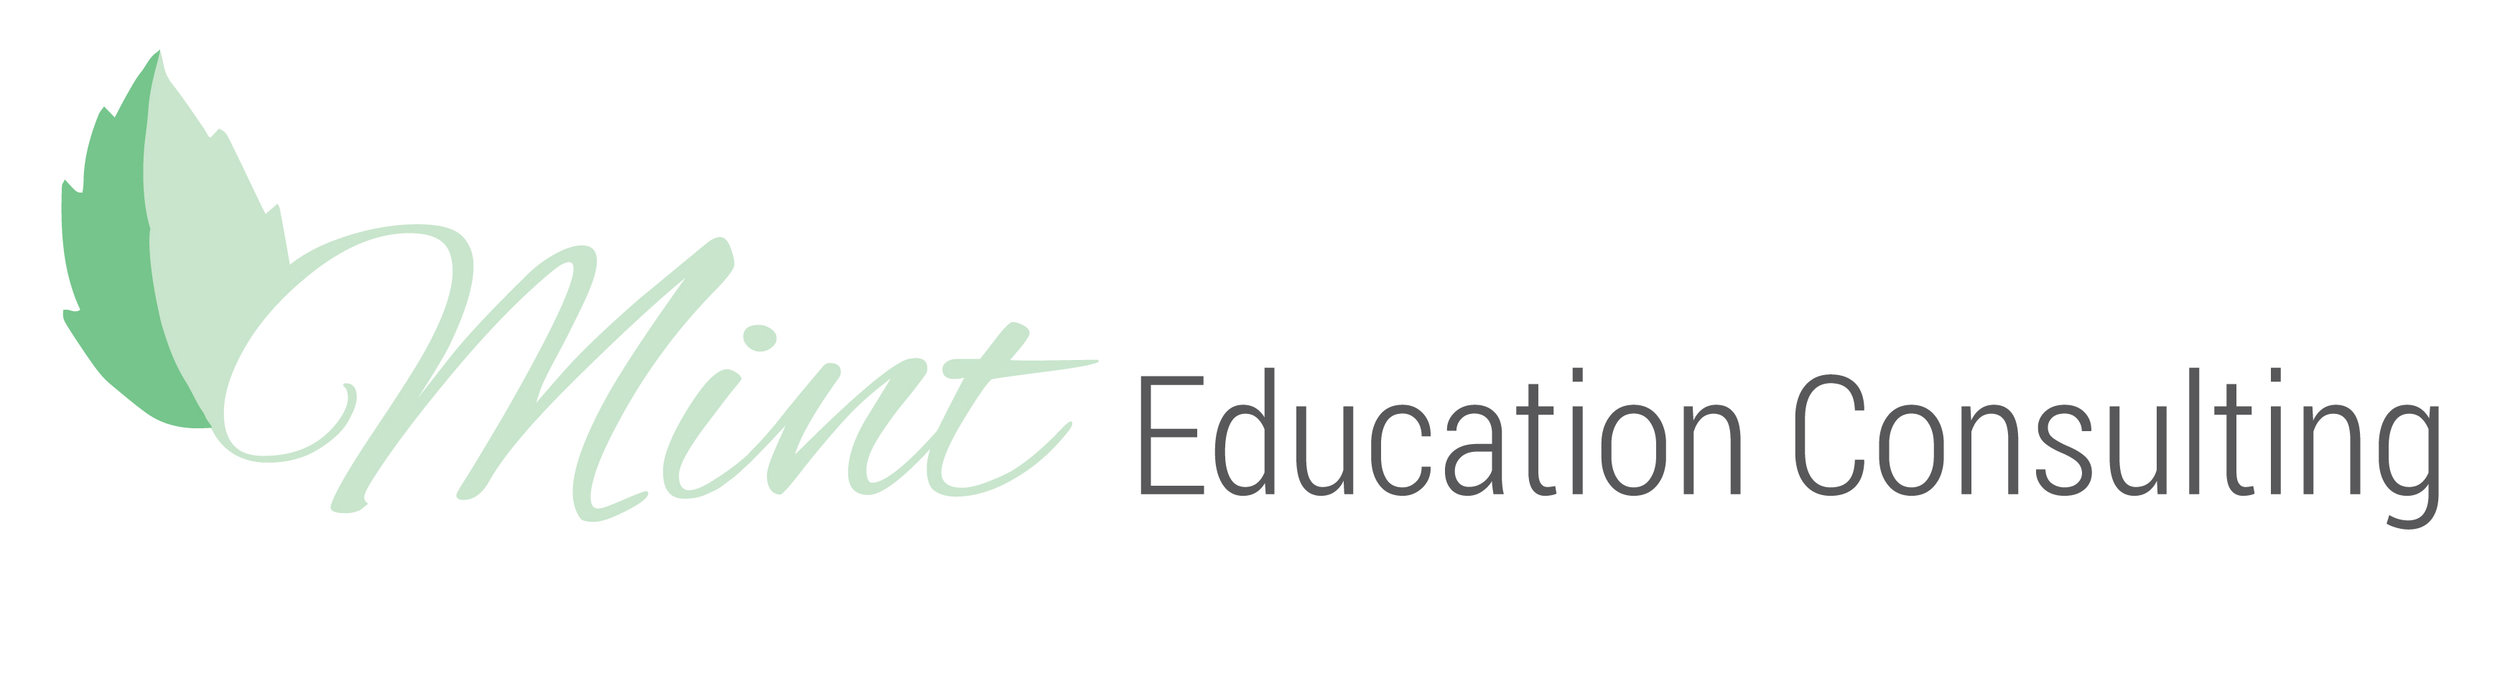 Mint Education Consulting